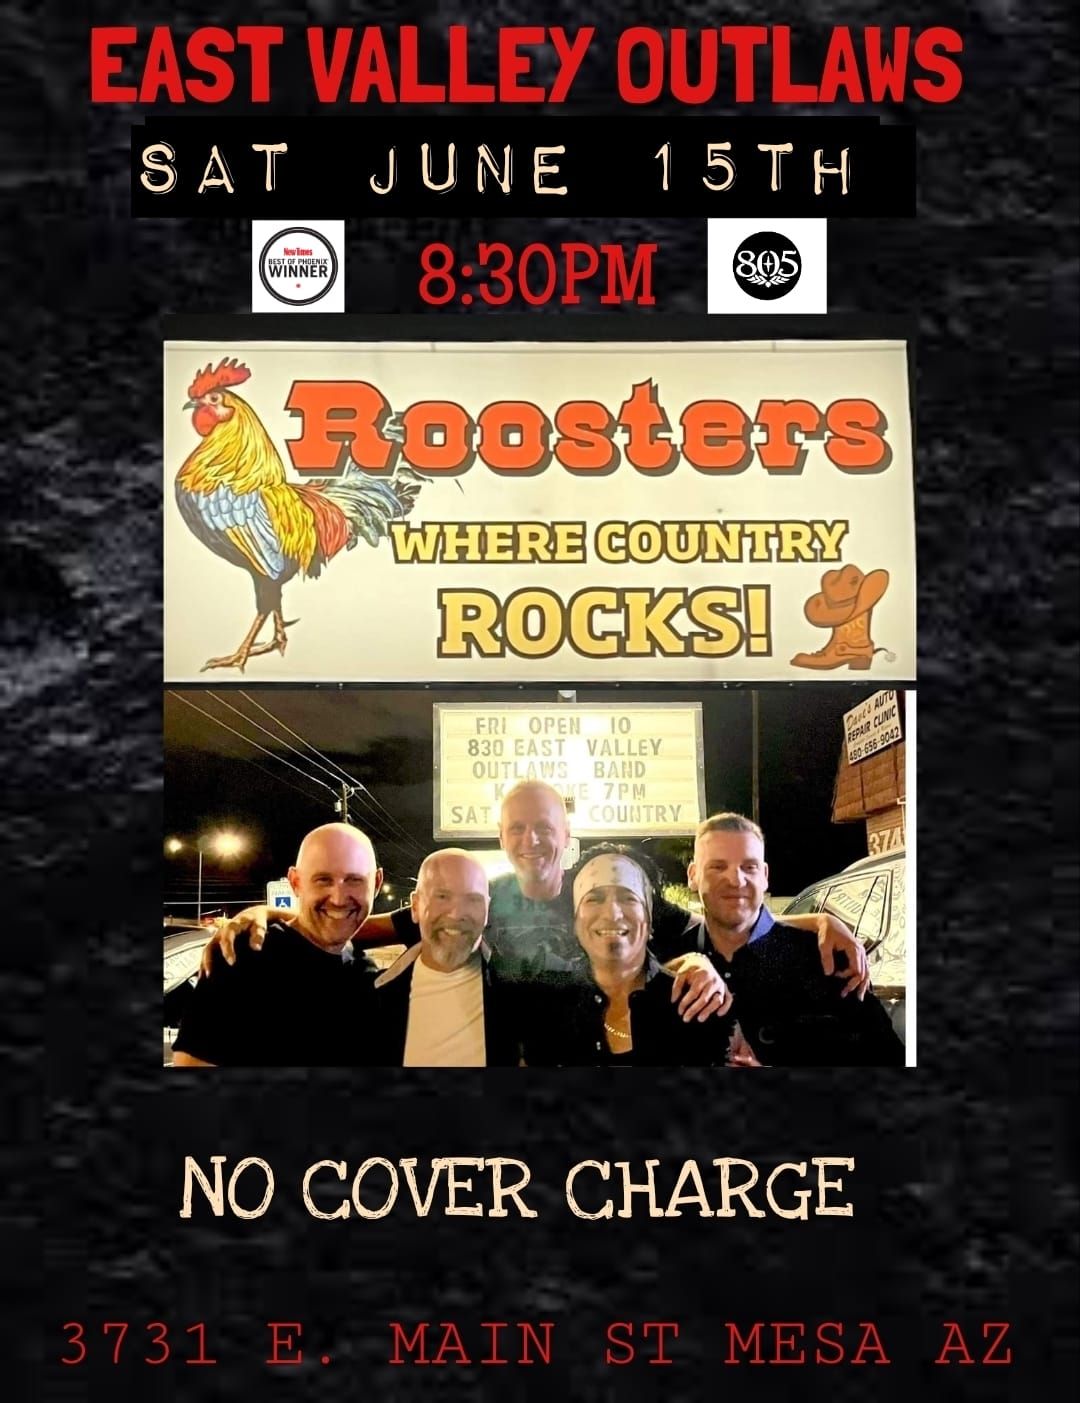 EAST VALLEY OUTLAWS BAND @ ROOSTERS 